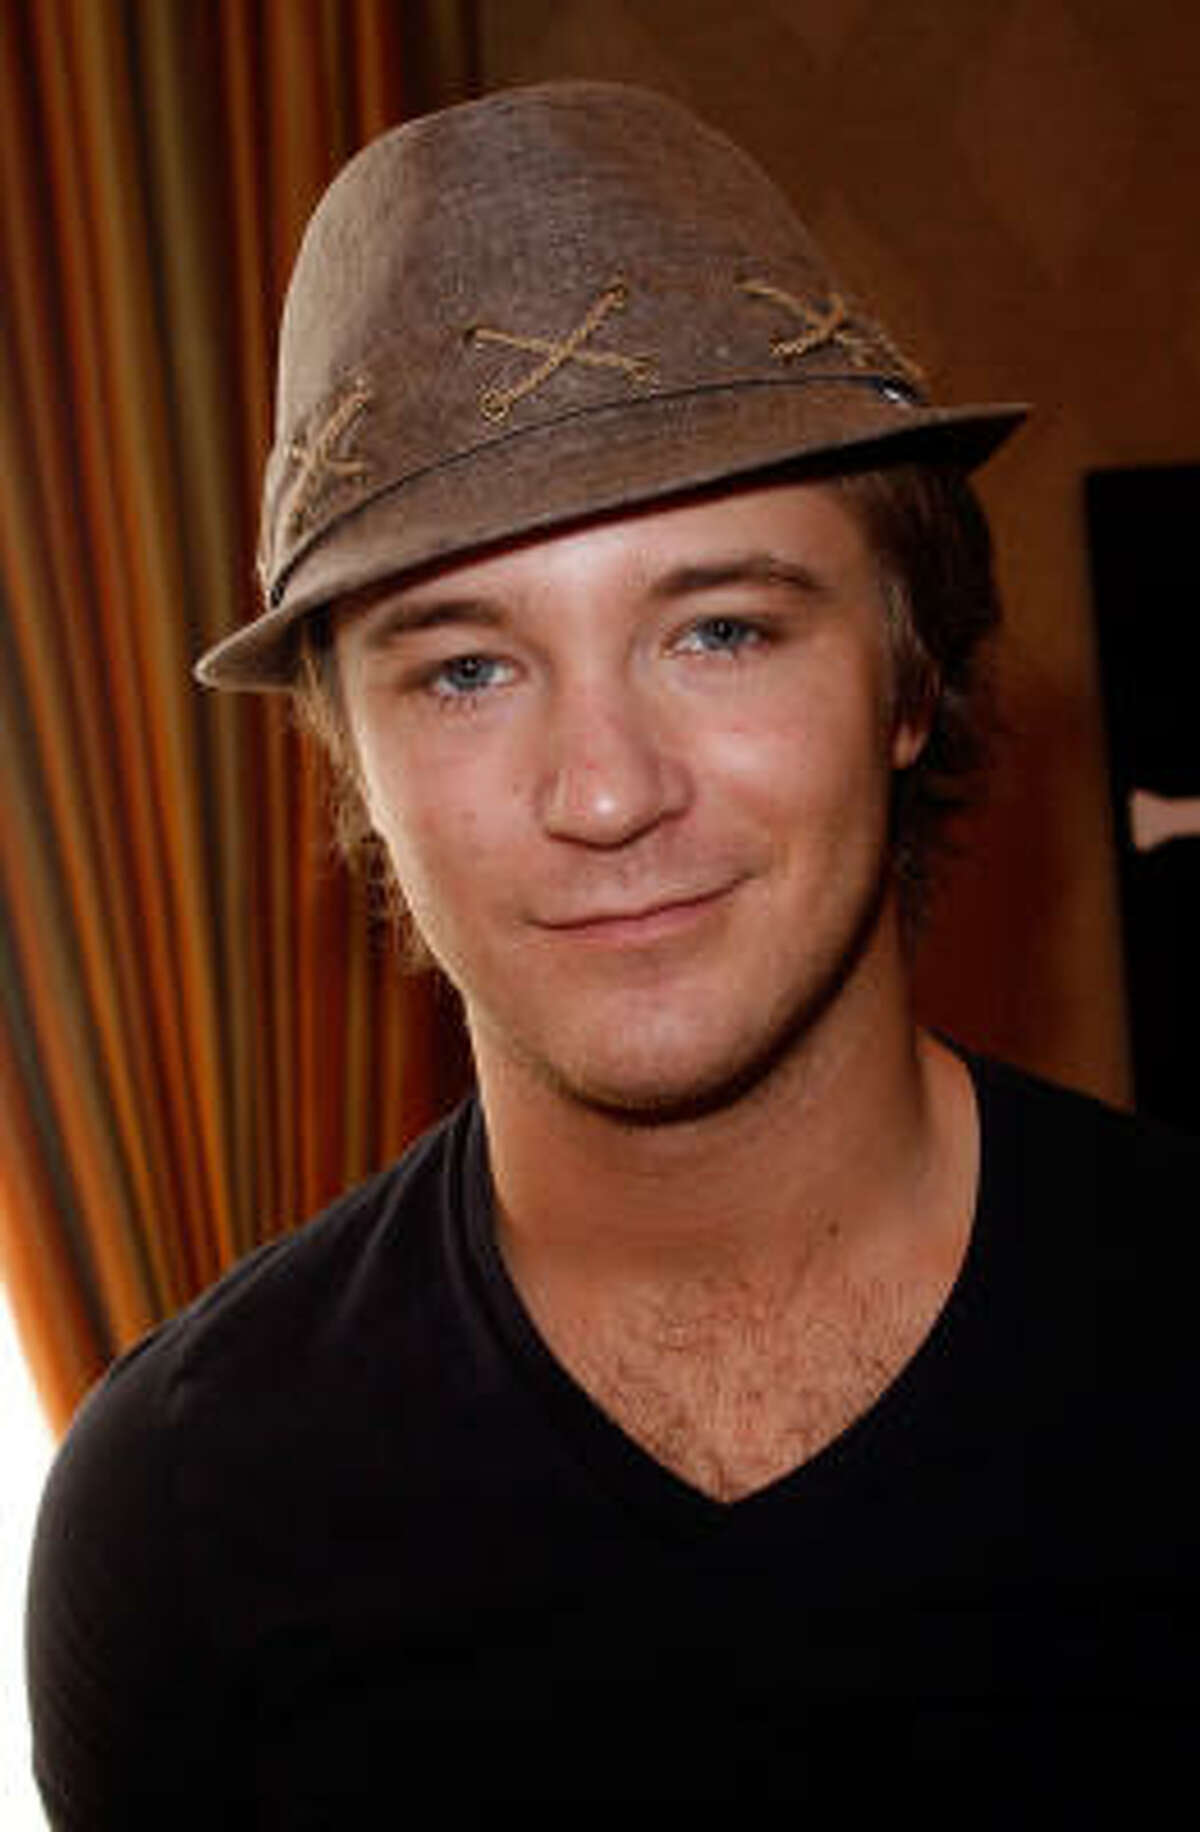 Twilight 's Michael Welch poses at the Block Headwear display during the HBO Luxury Lounge.